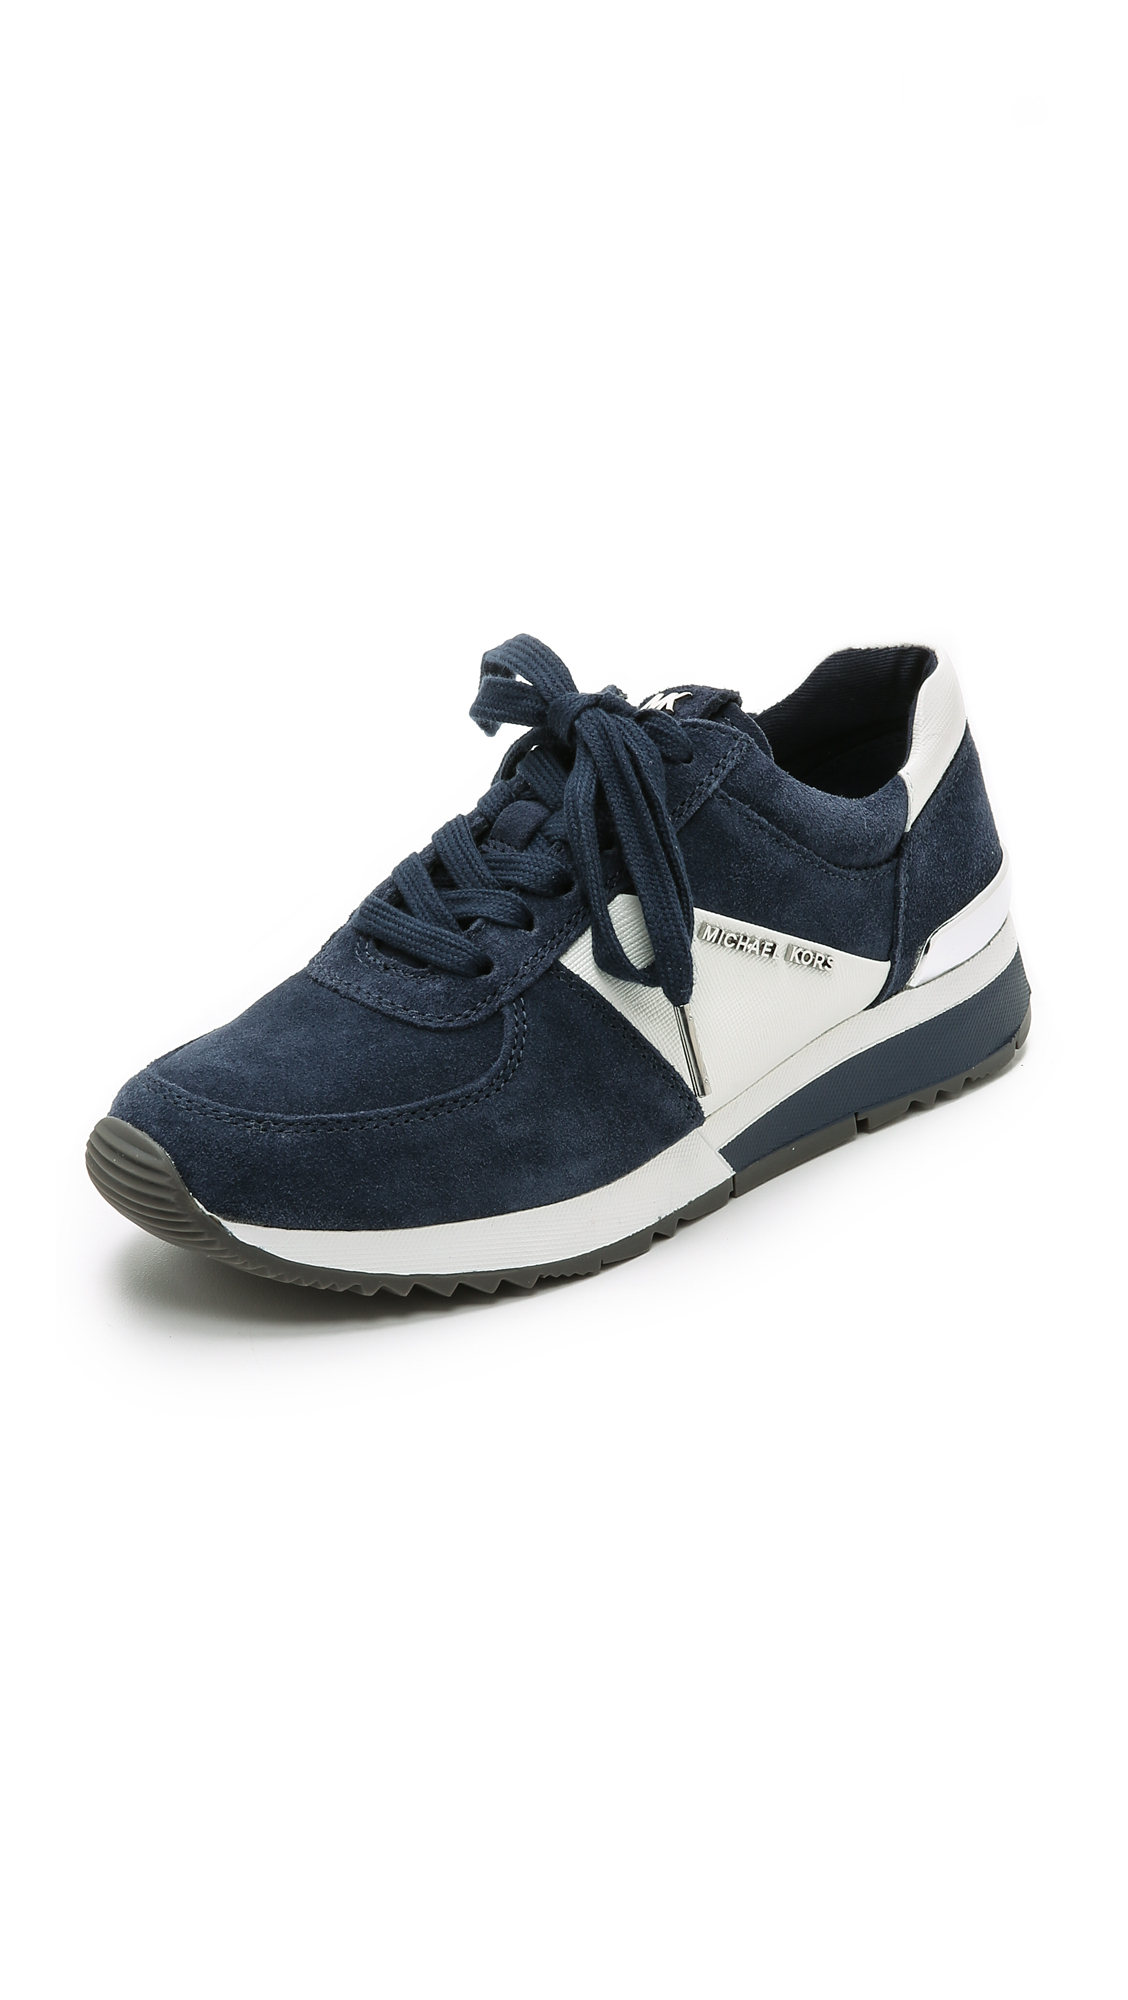 MICHAEL Michael Kors Allie Trainers - Navy in Blue - Lyst